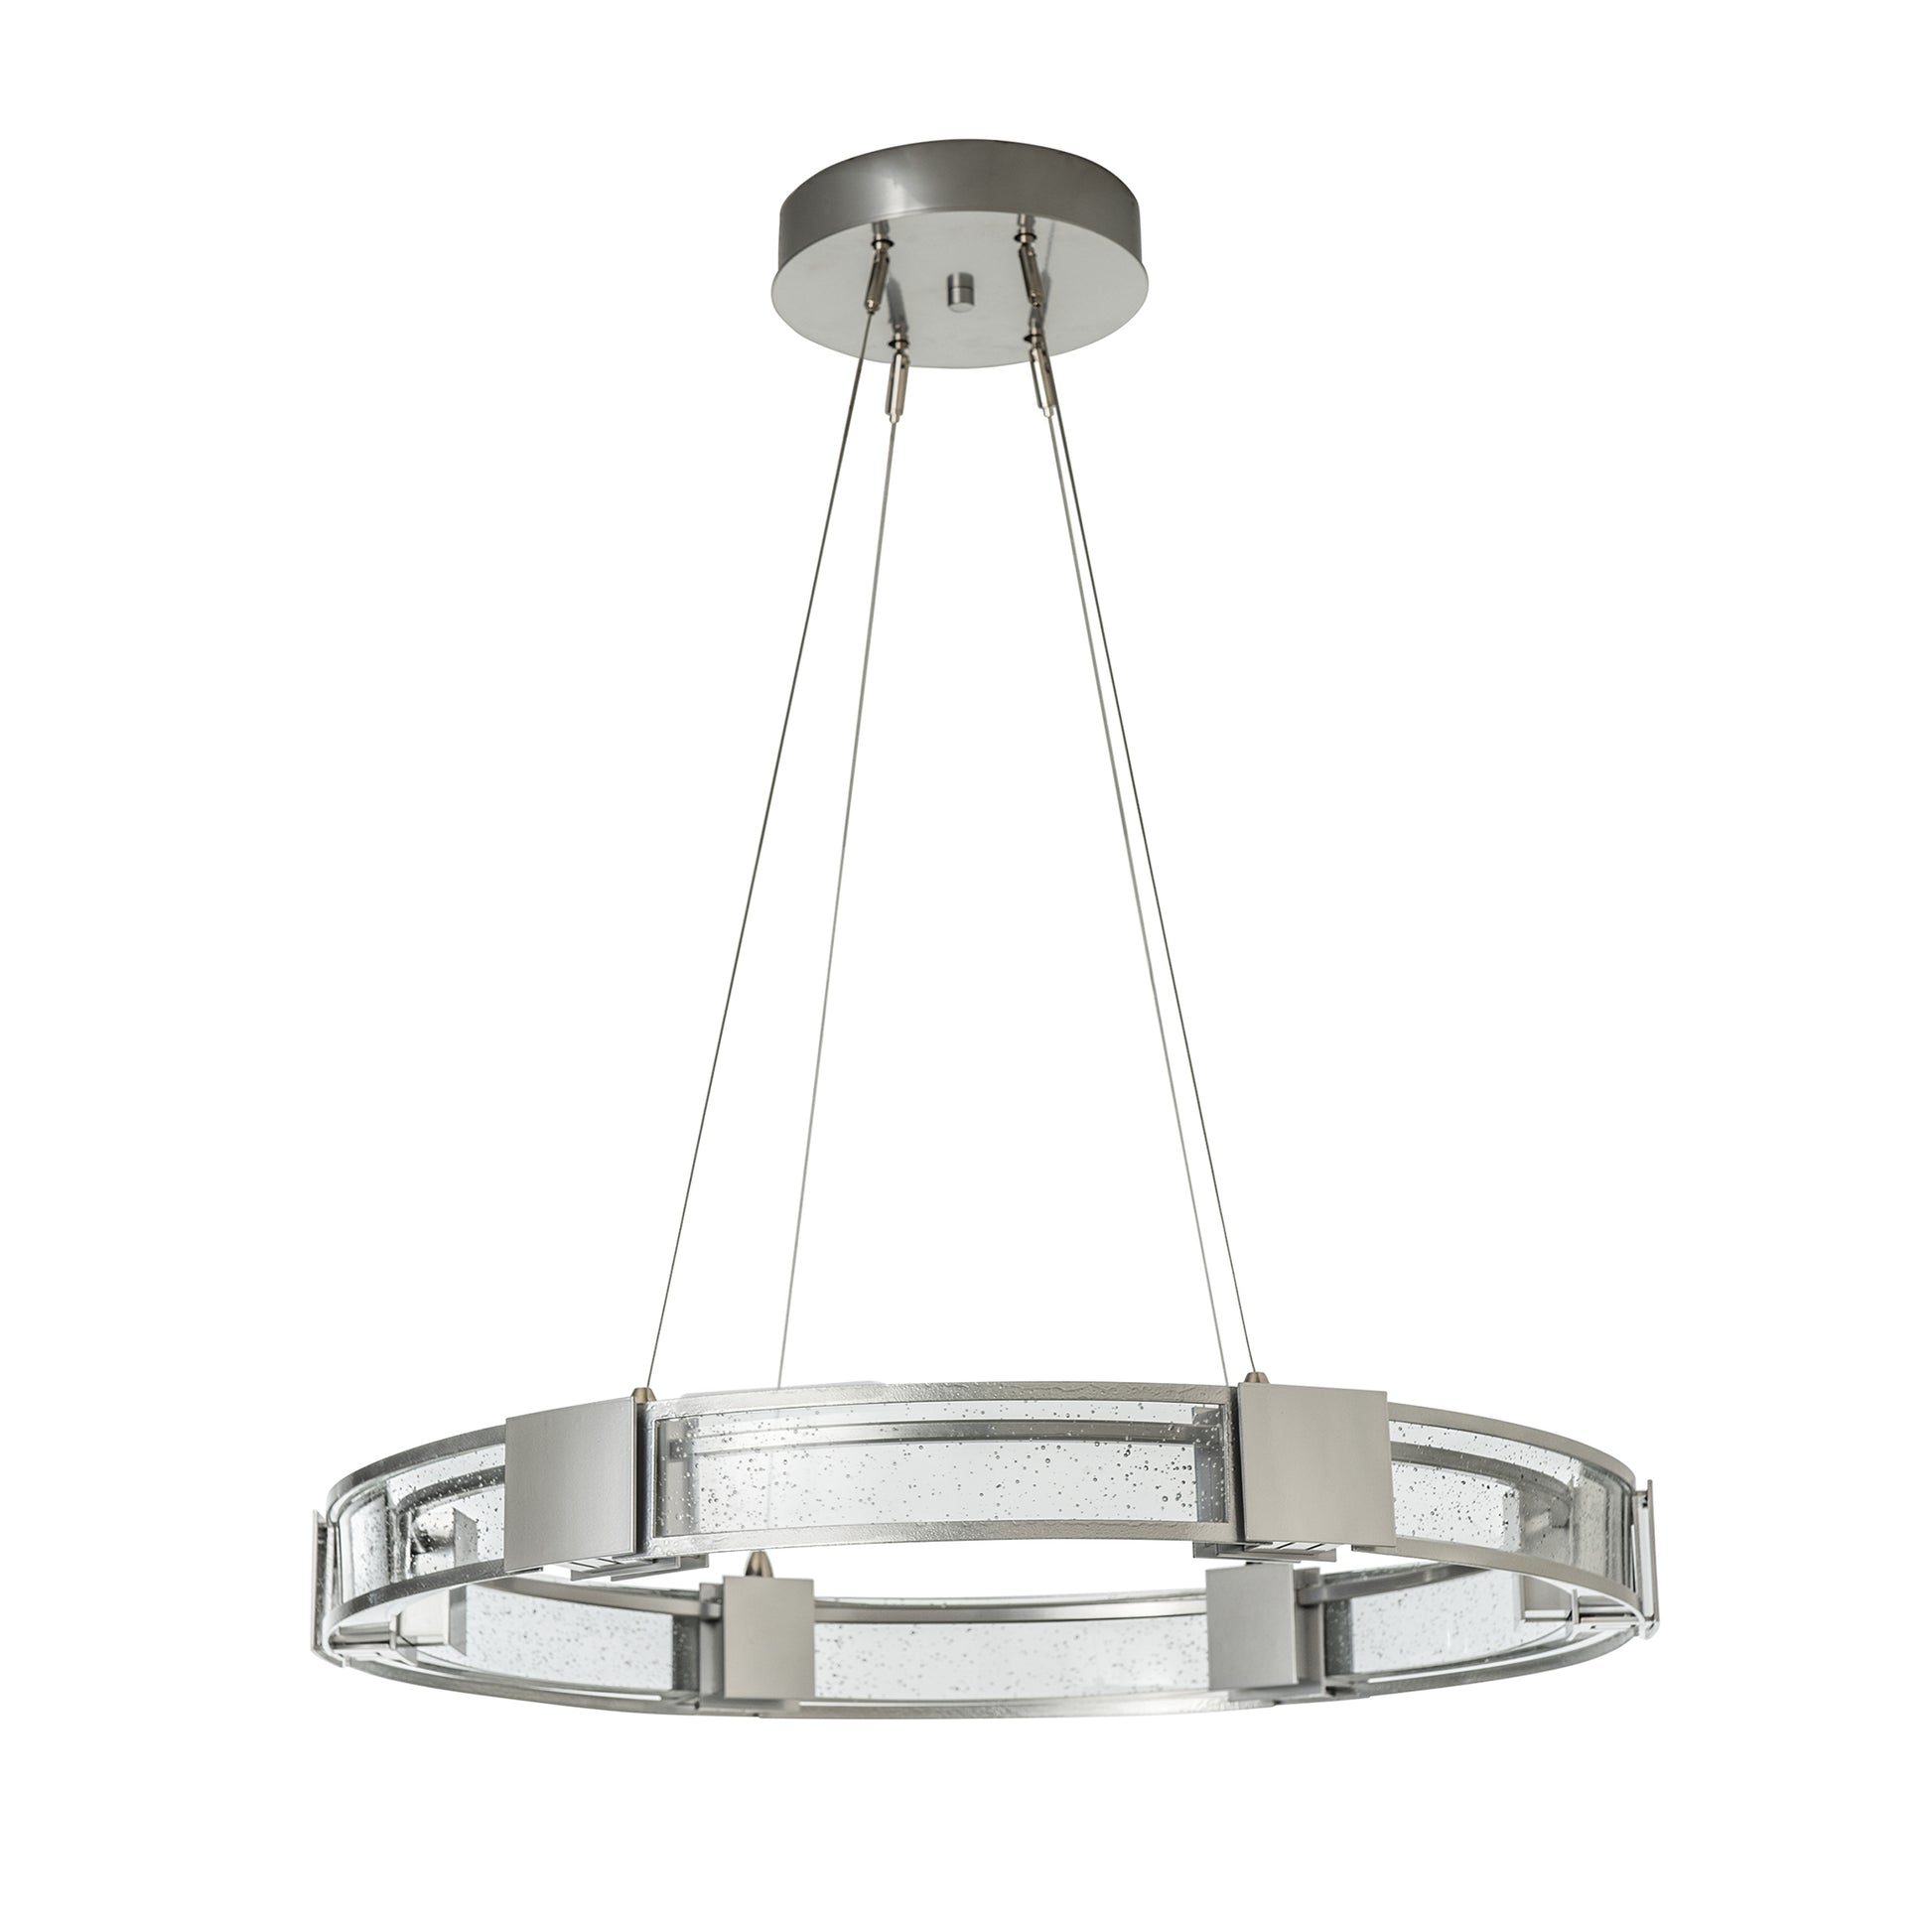 The Hubbardton Forge Aura Glass Pendant is a sleek and contemporary light fixture crafted from hand-forged steel, featuring a circular shade made of layered glass.